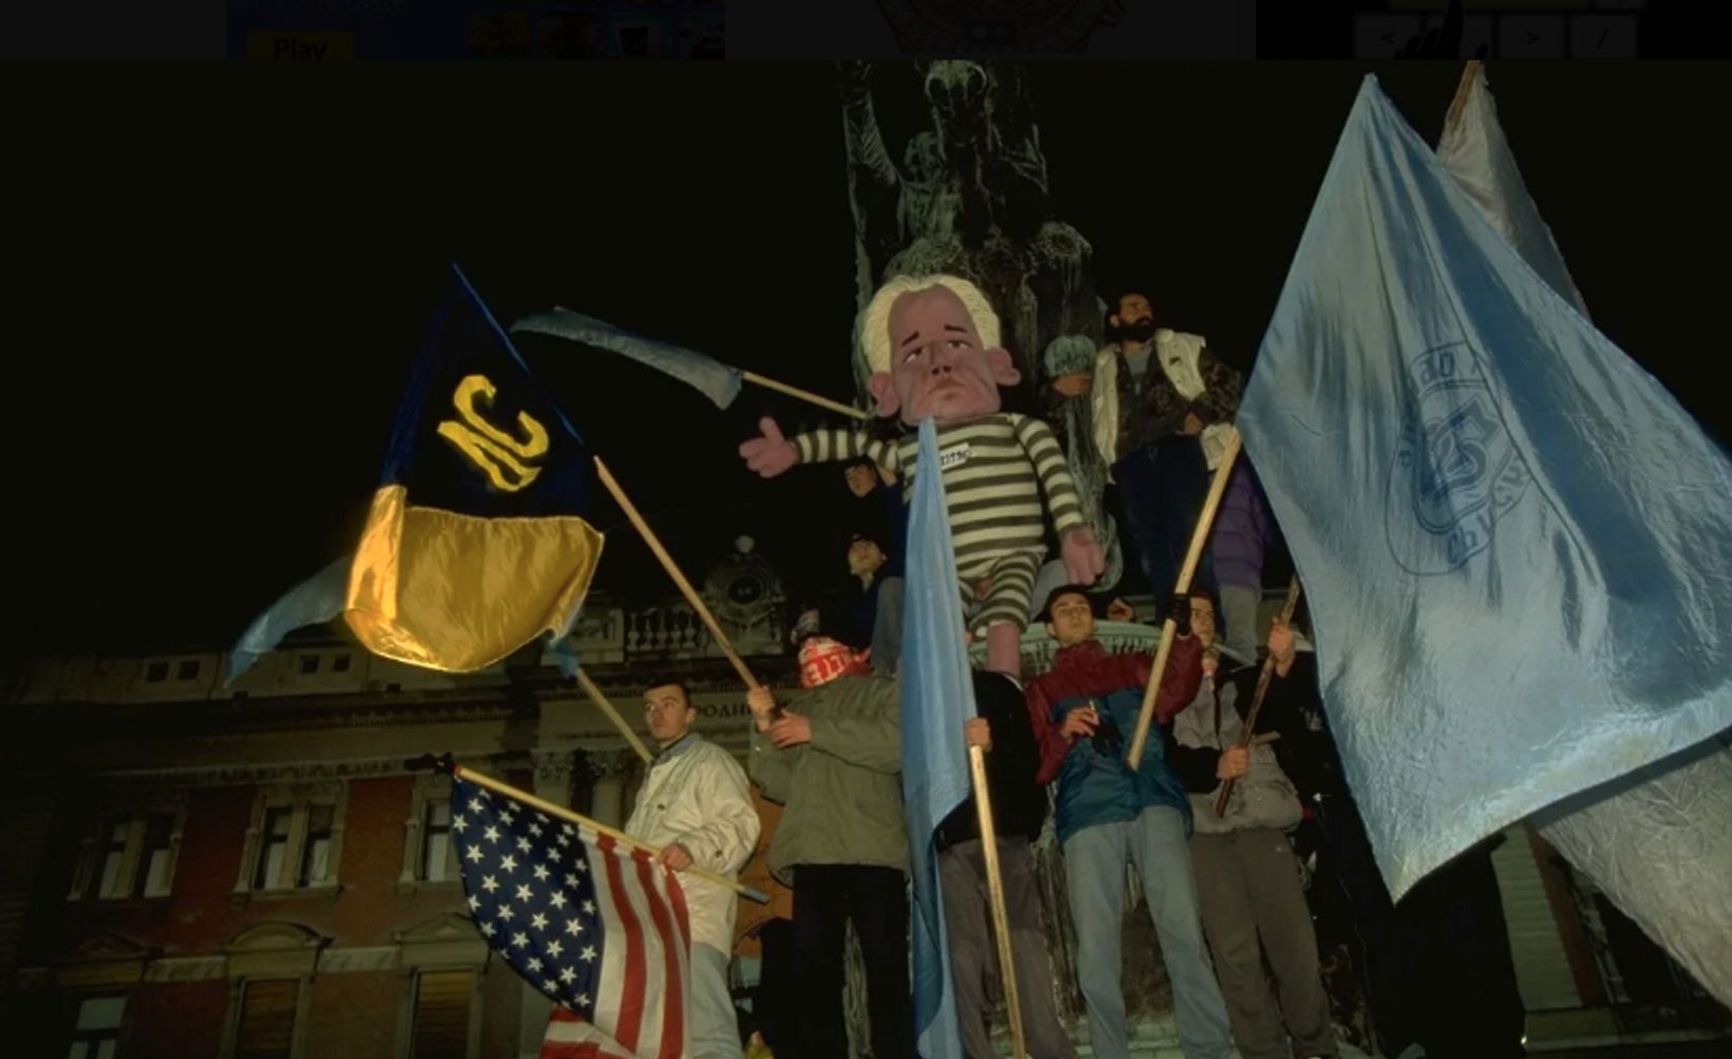 An anti-government demonstration in Belgrade, 1996